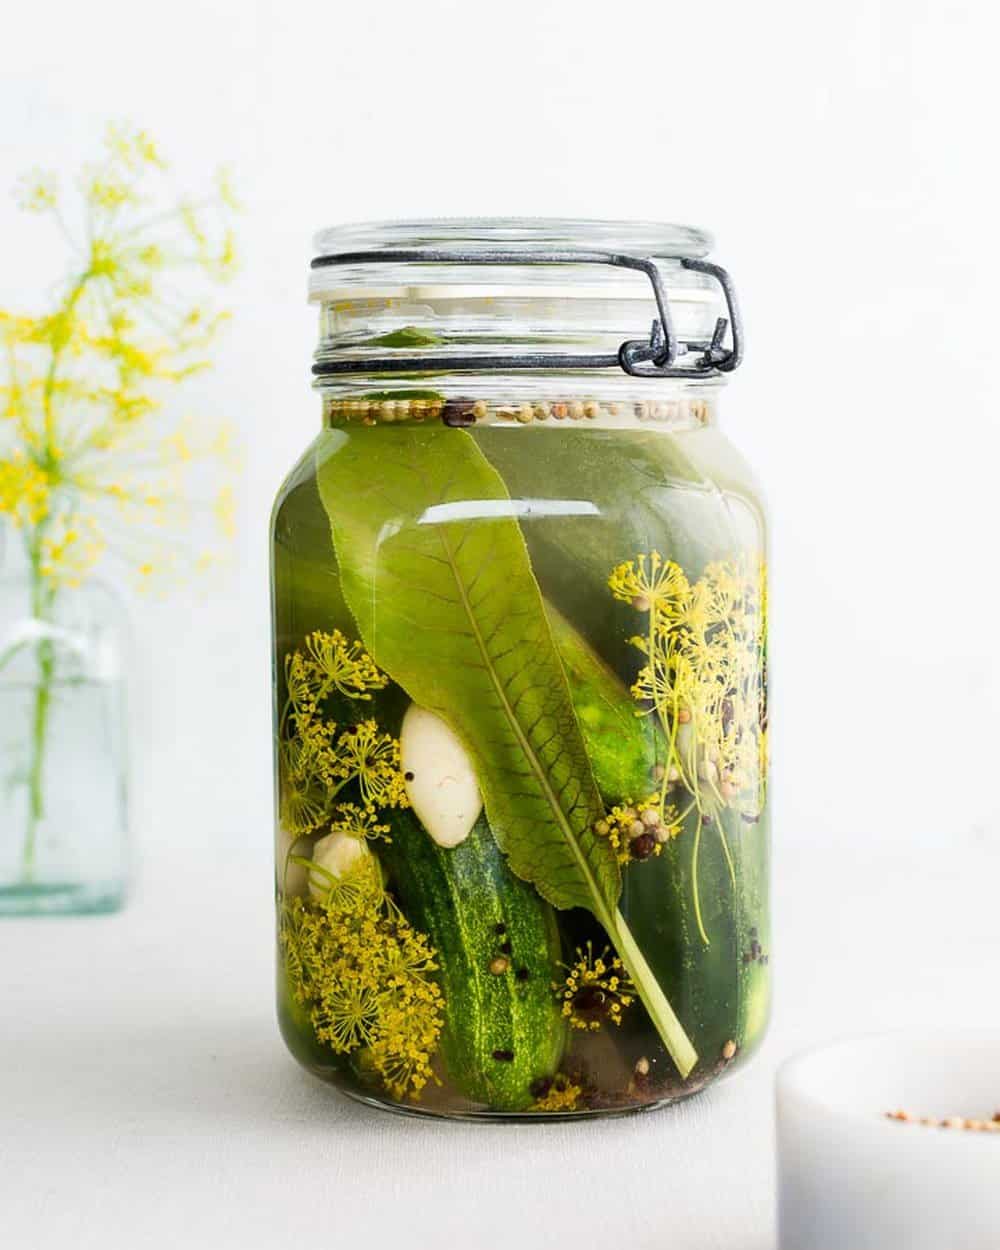 Garlic Dill Sour Pickles